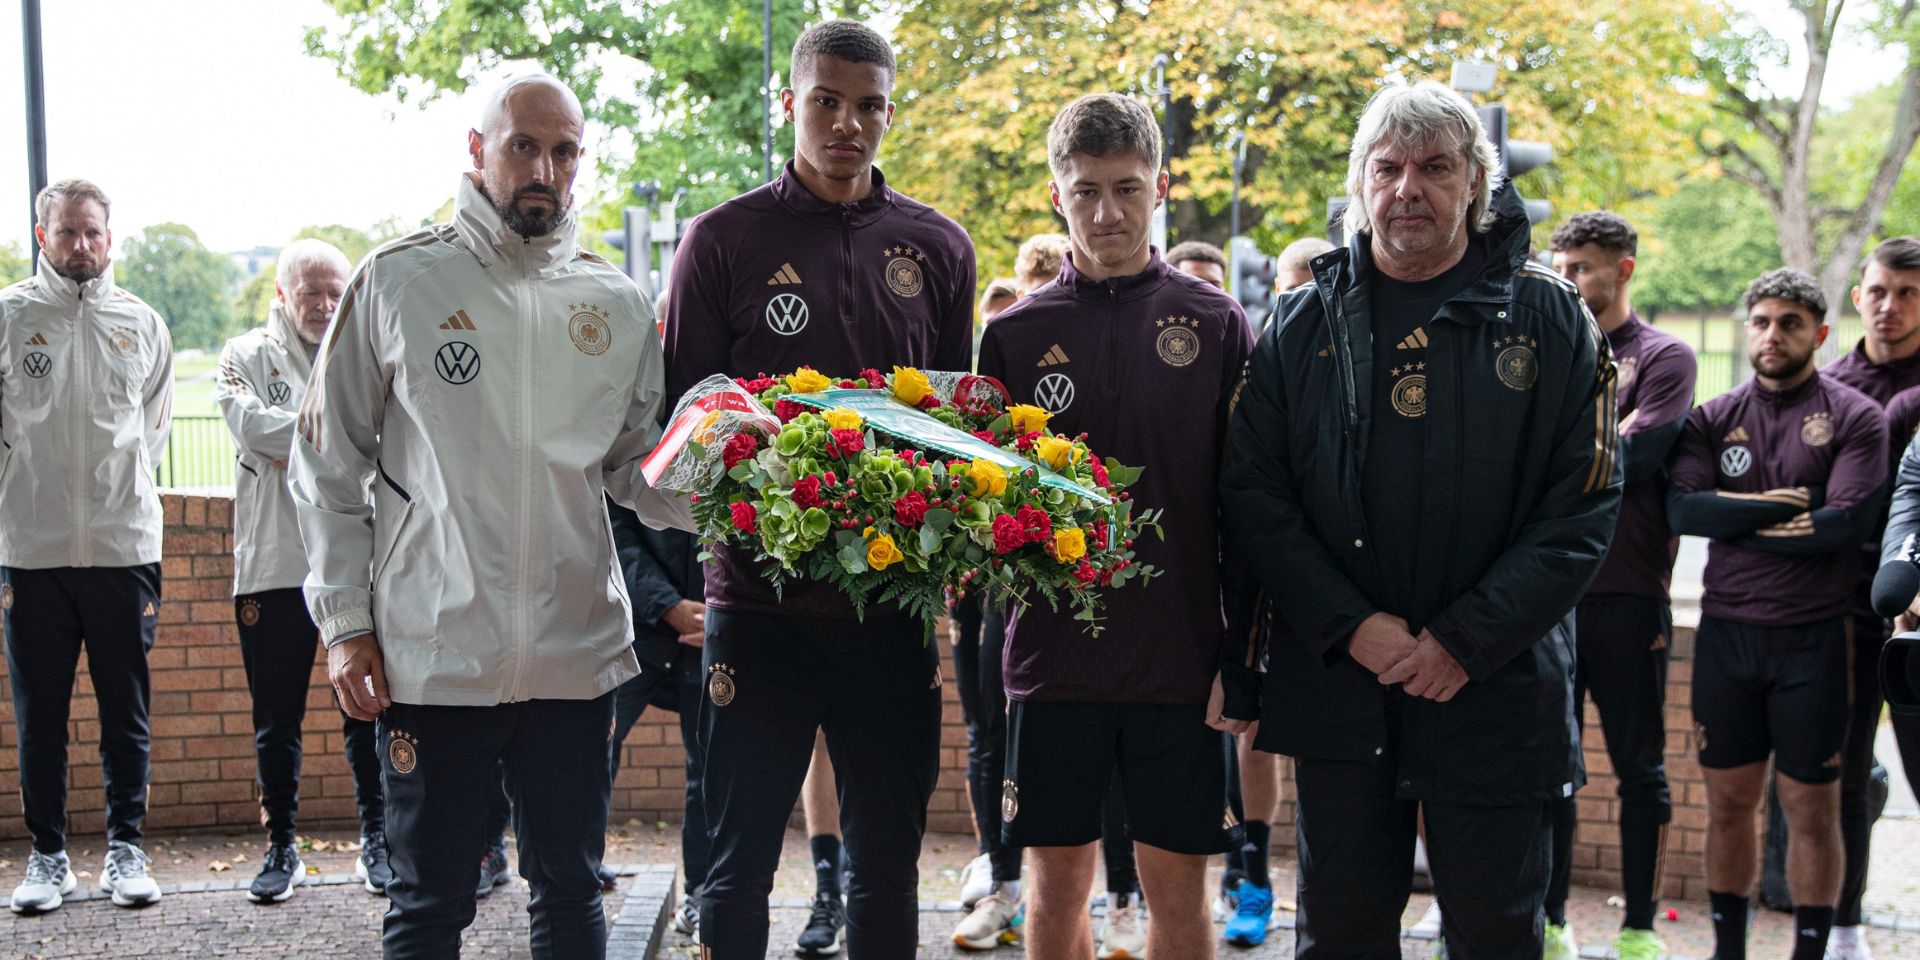 (Images) German U21 squad lay flowers at Hillsborough memorial ahead of England match